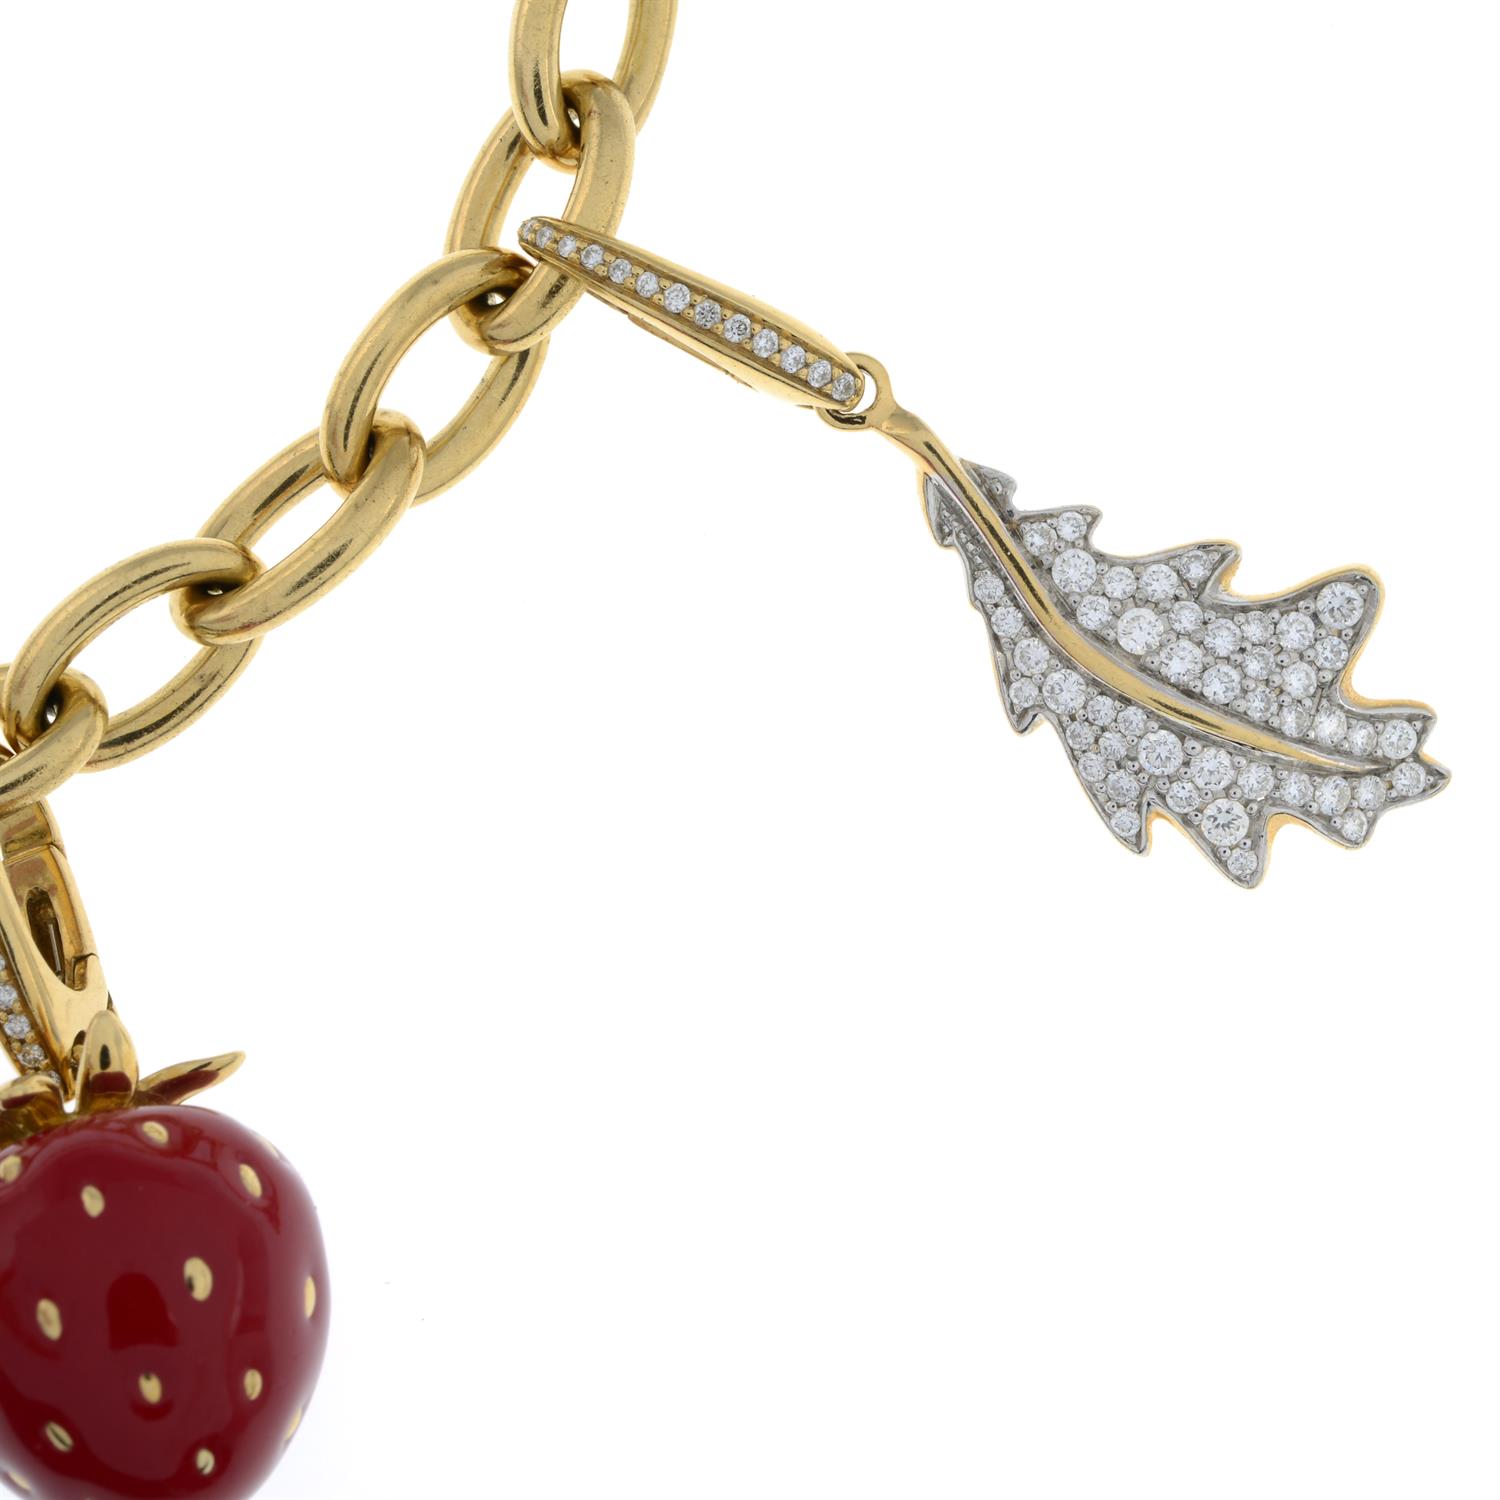 18ct gold bracelet and four charms, by Asprey - Image 6 of 7